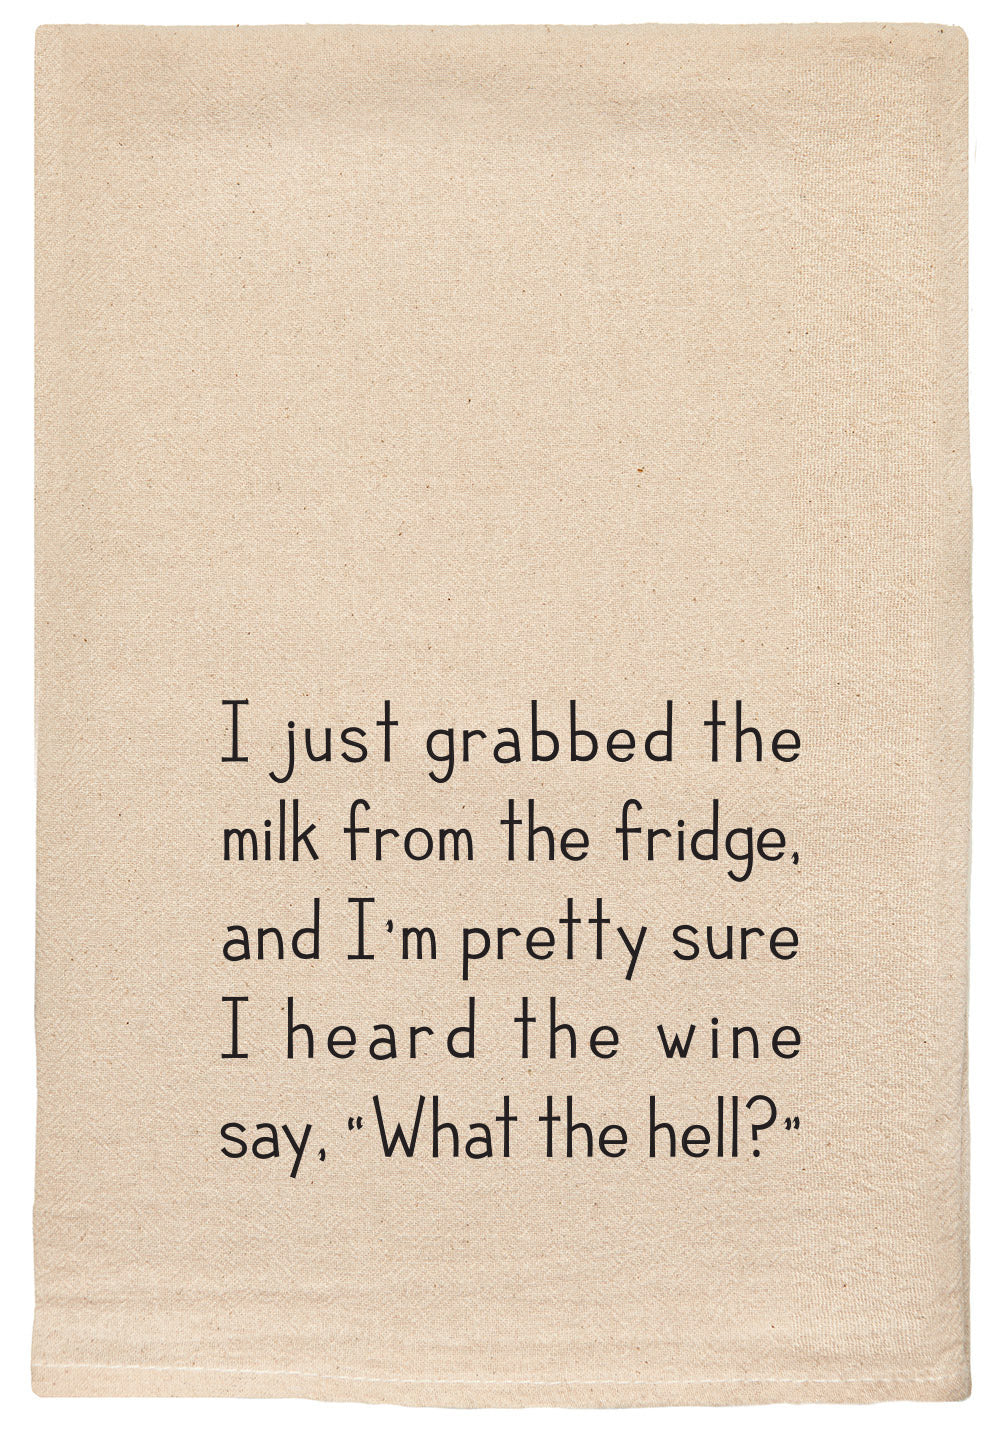 I just grabbed the milk from the fridge and I'm pretty sure I heard the wine say, "what the hell?"